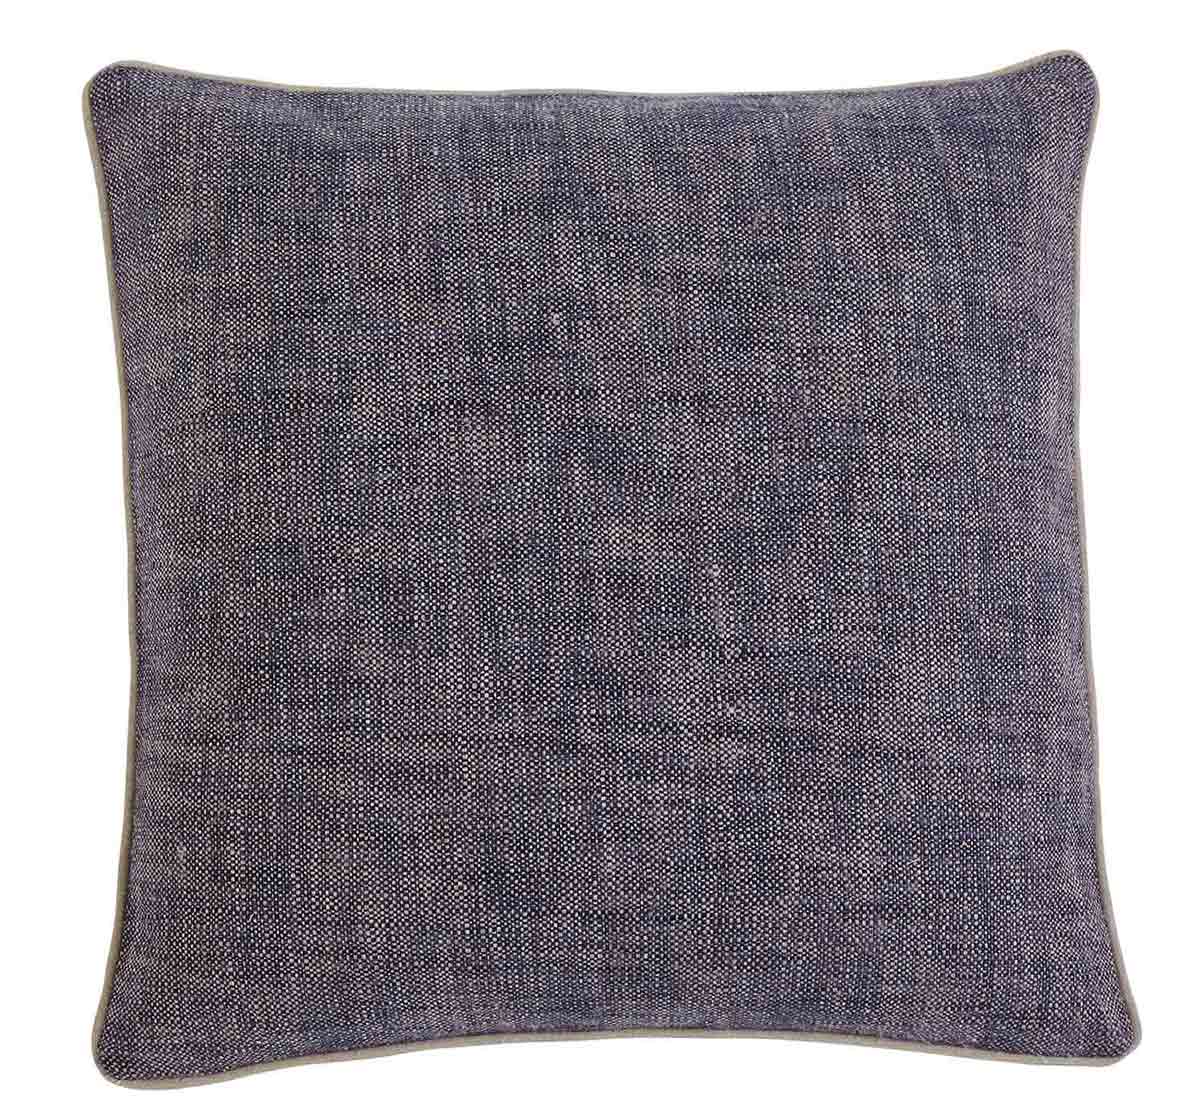 Ashley Textured Pillow Cover - Set of 4 - Navy